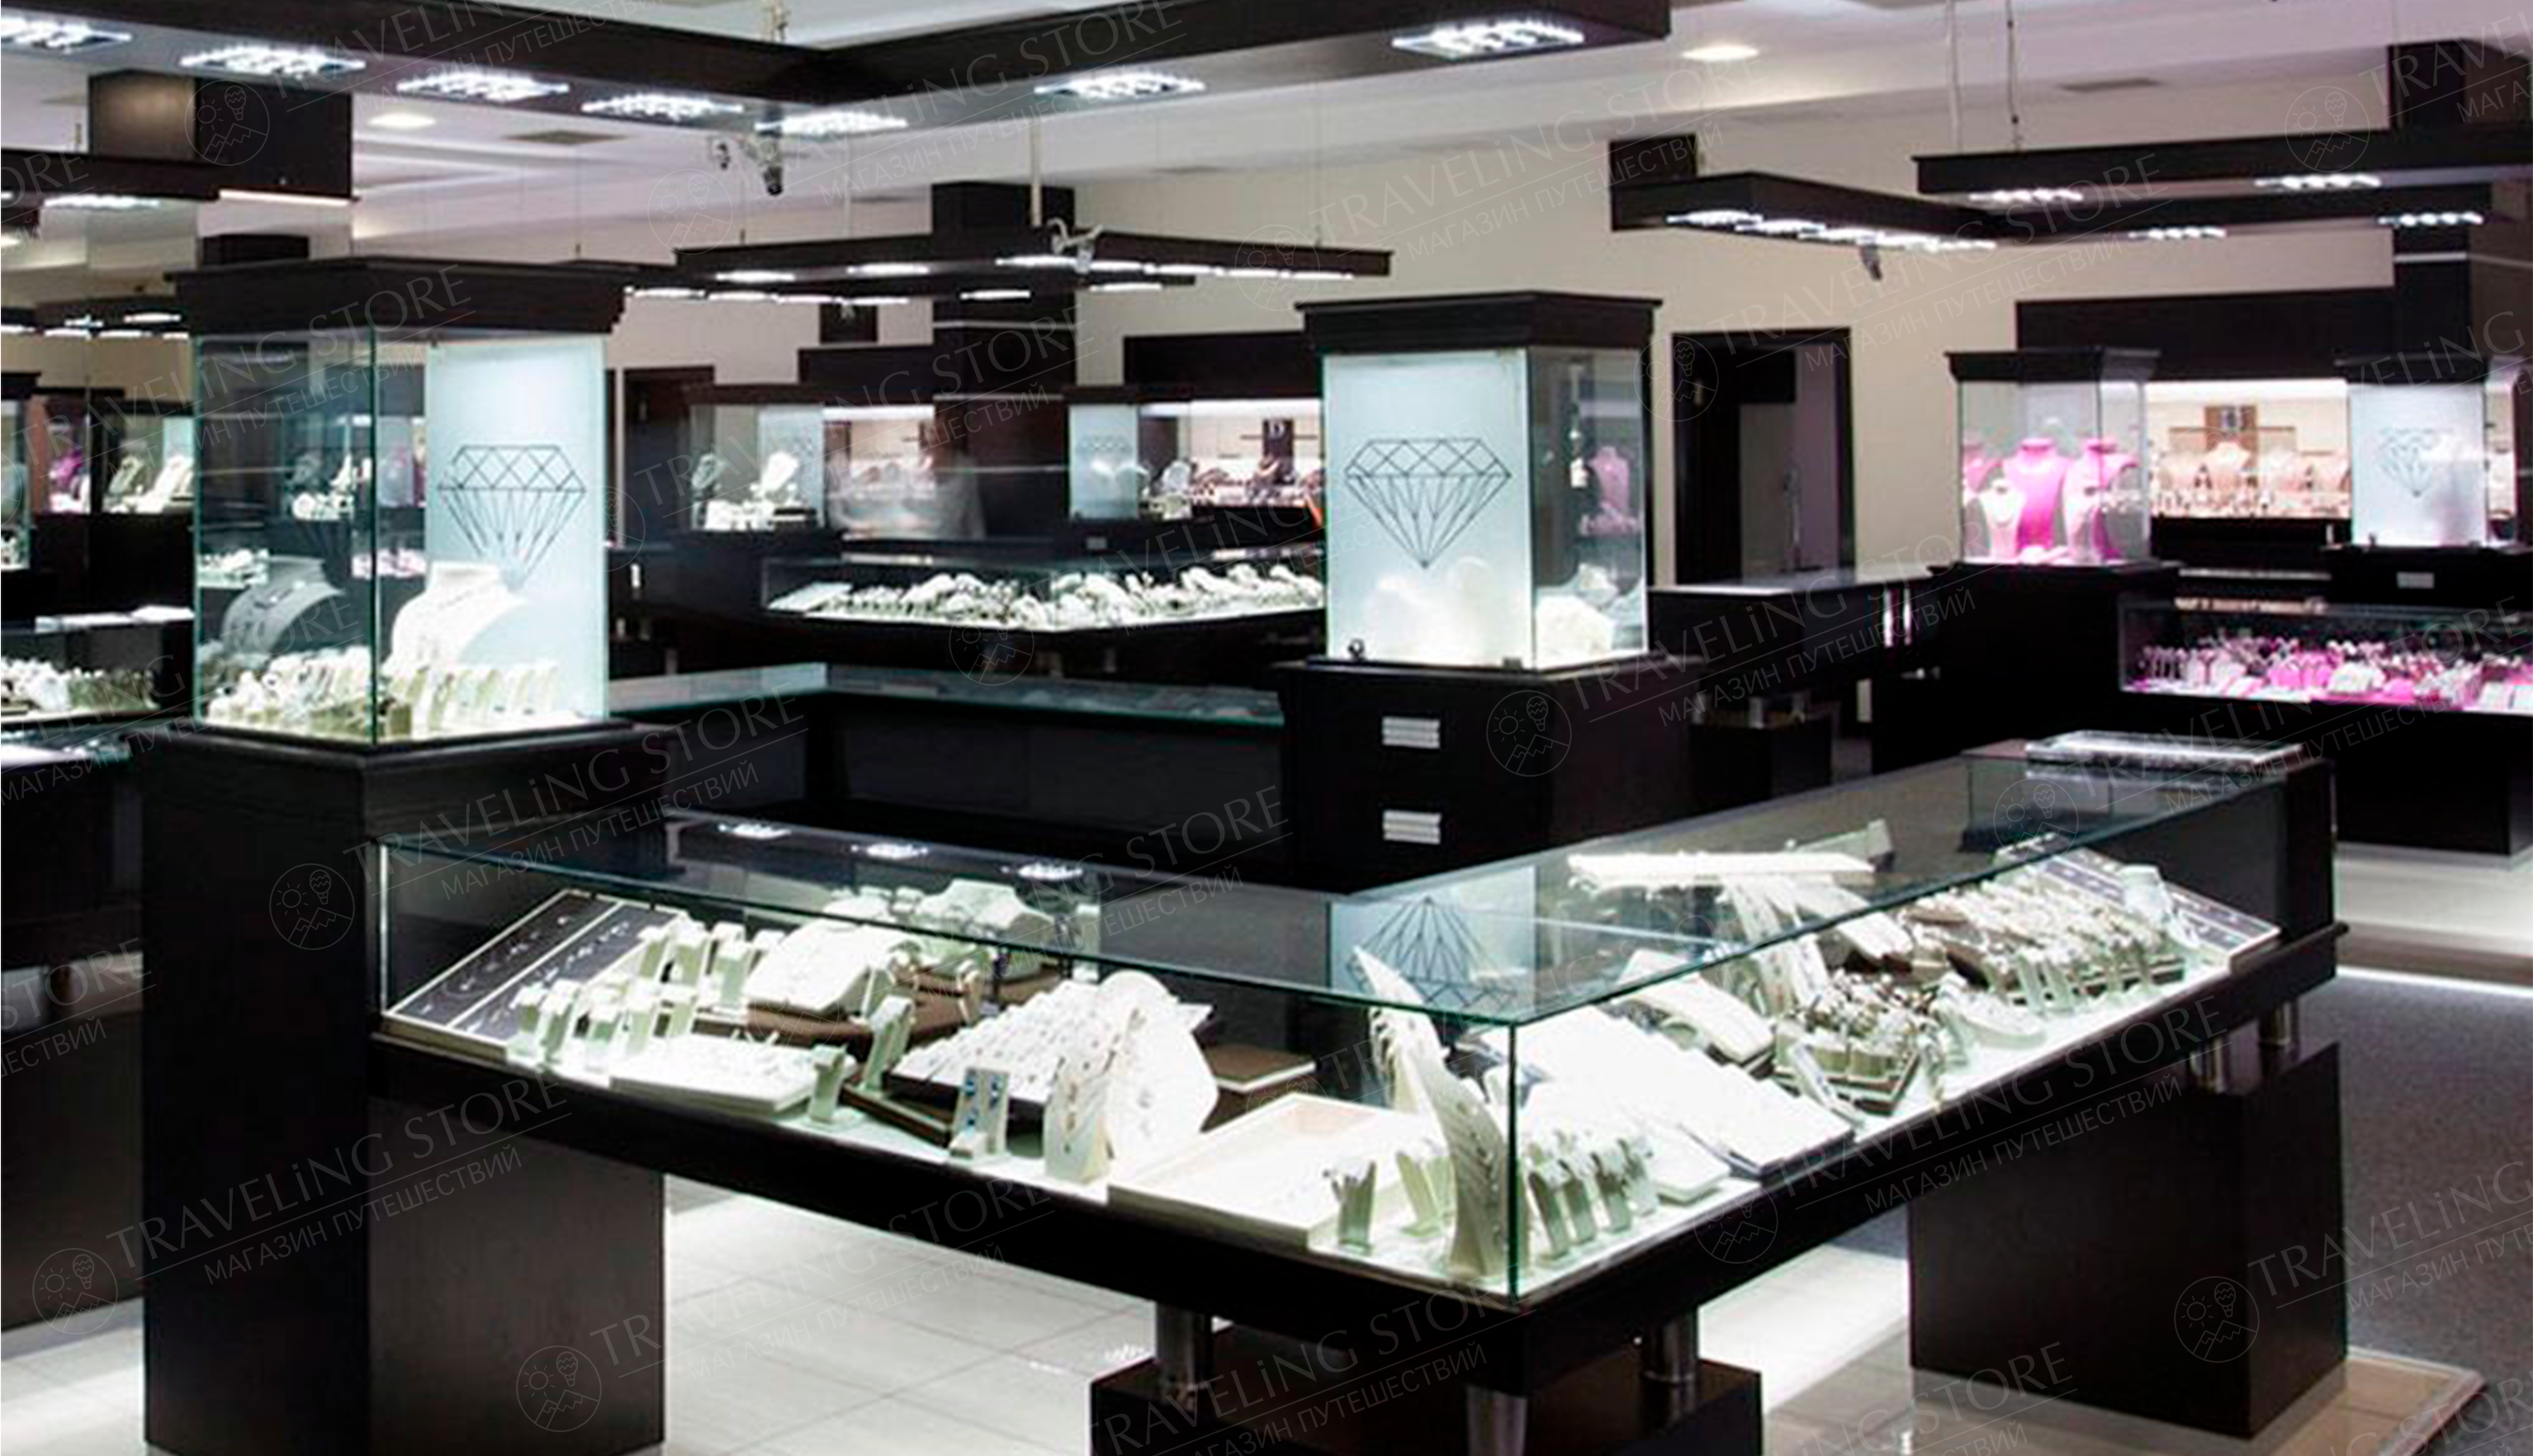 D Jewels: here come back for new shopping from Belek